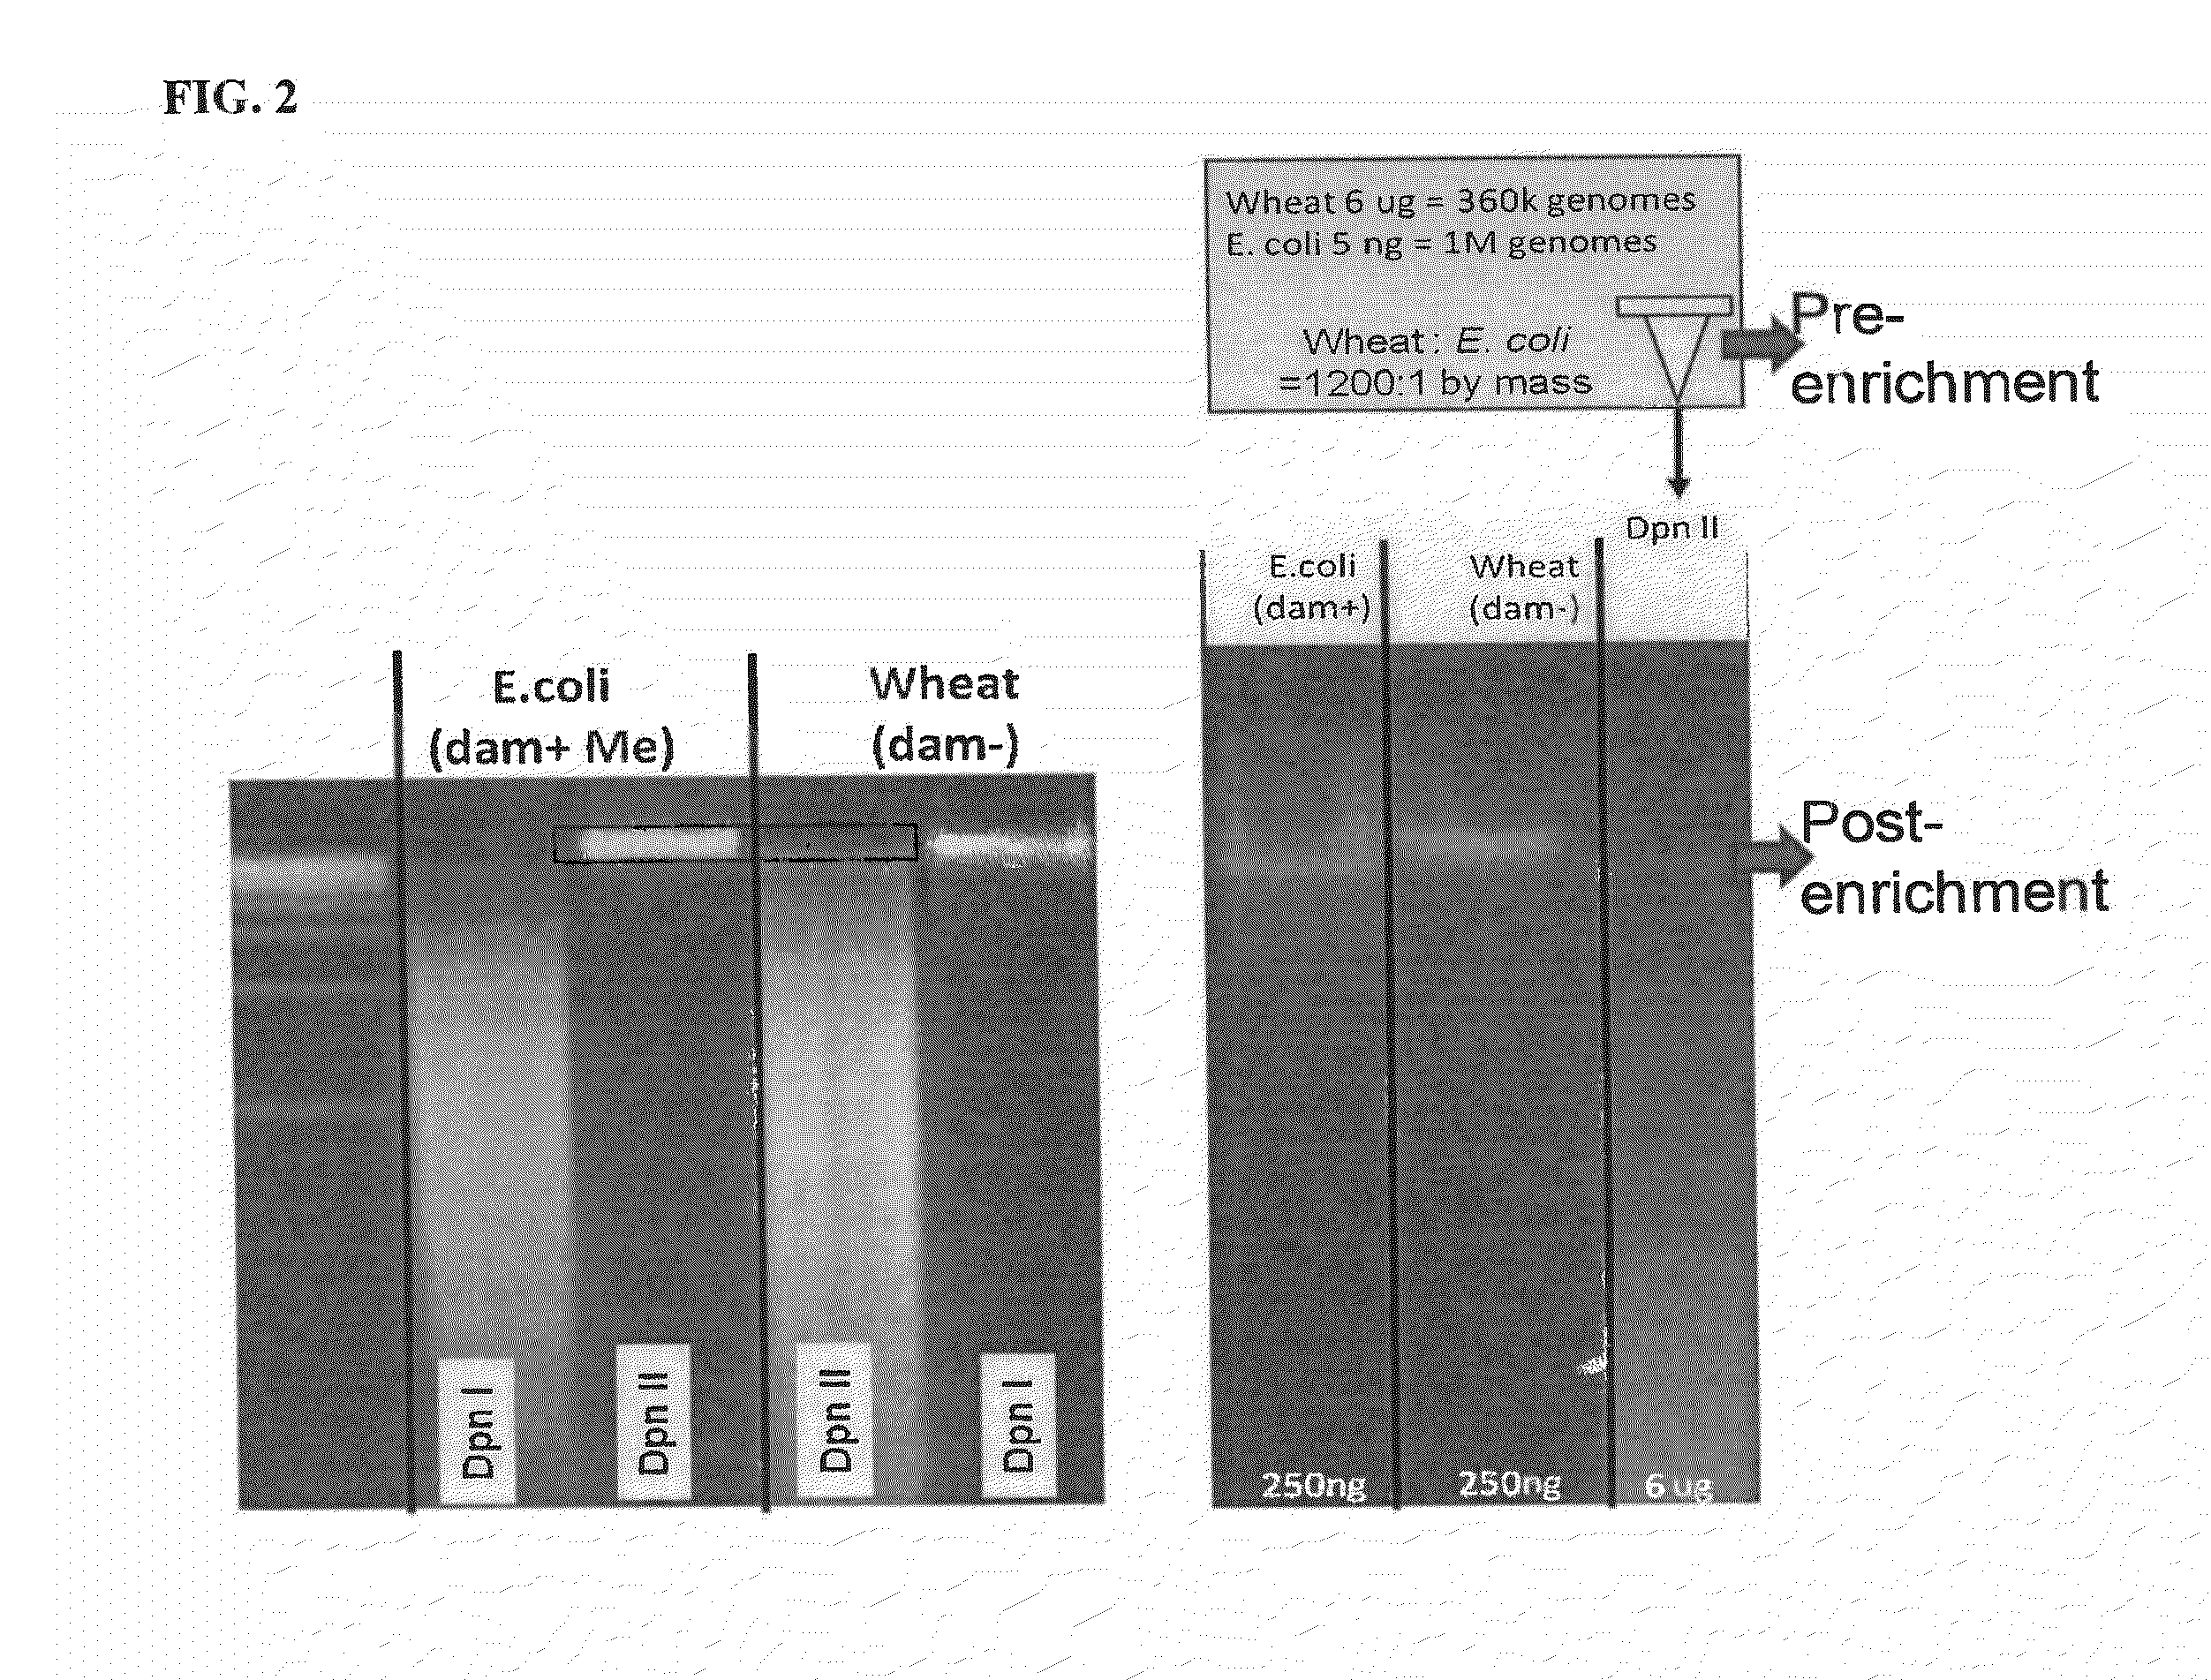 Methods and Compositions for Segregating Target Nucleic Acid from Mixed Nucleic Acid Samples